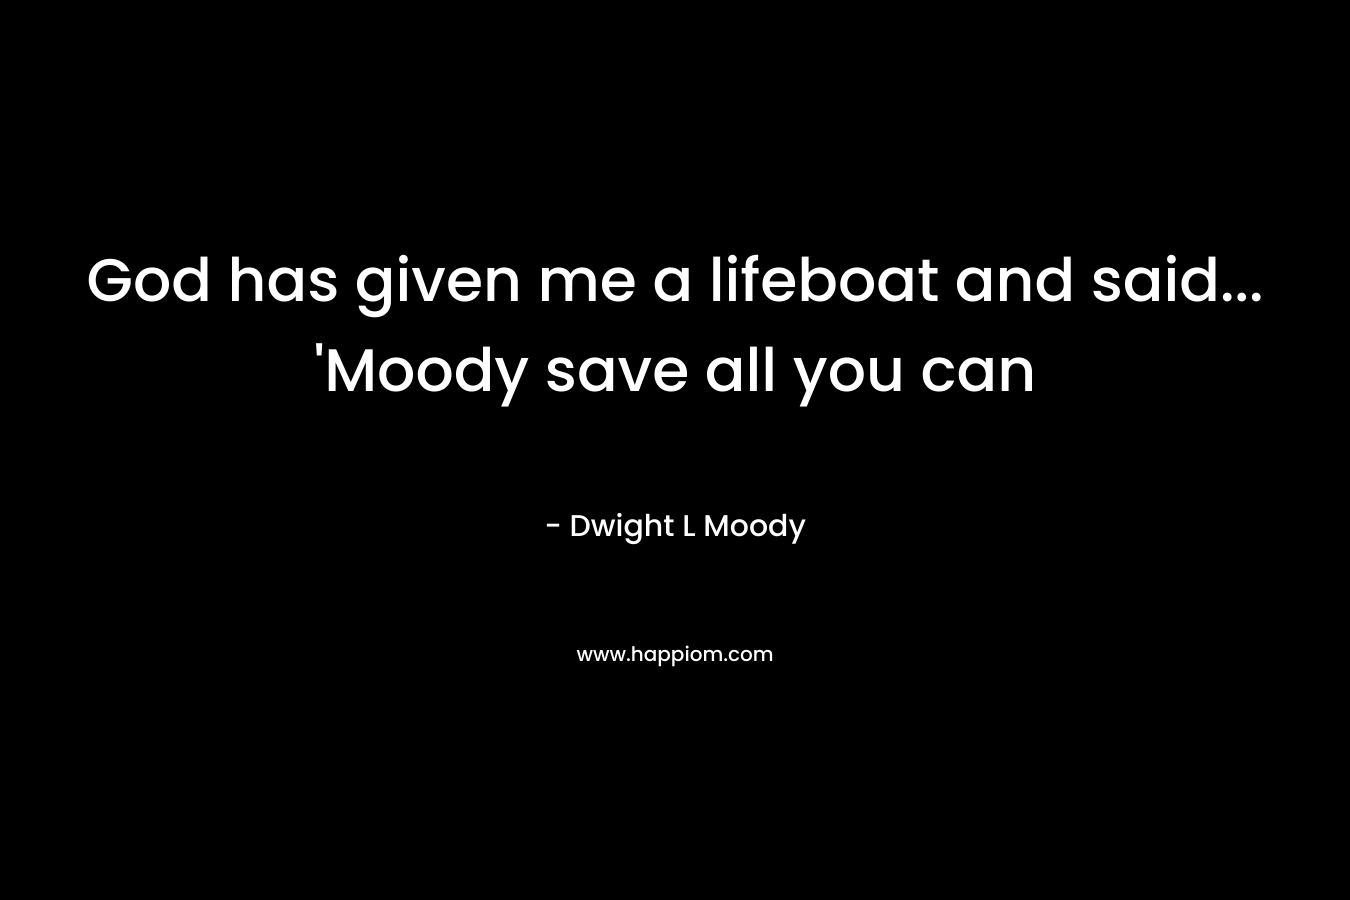 God has given me a lifeboat and said... 'Moody save all you can